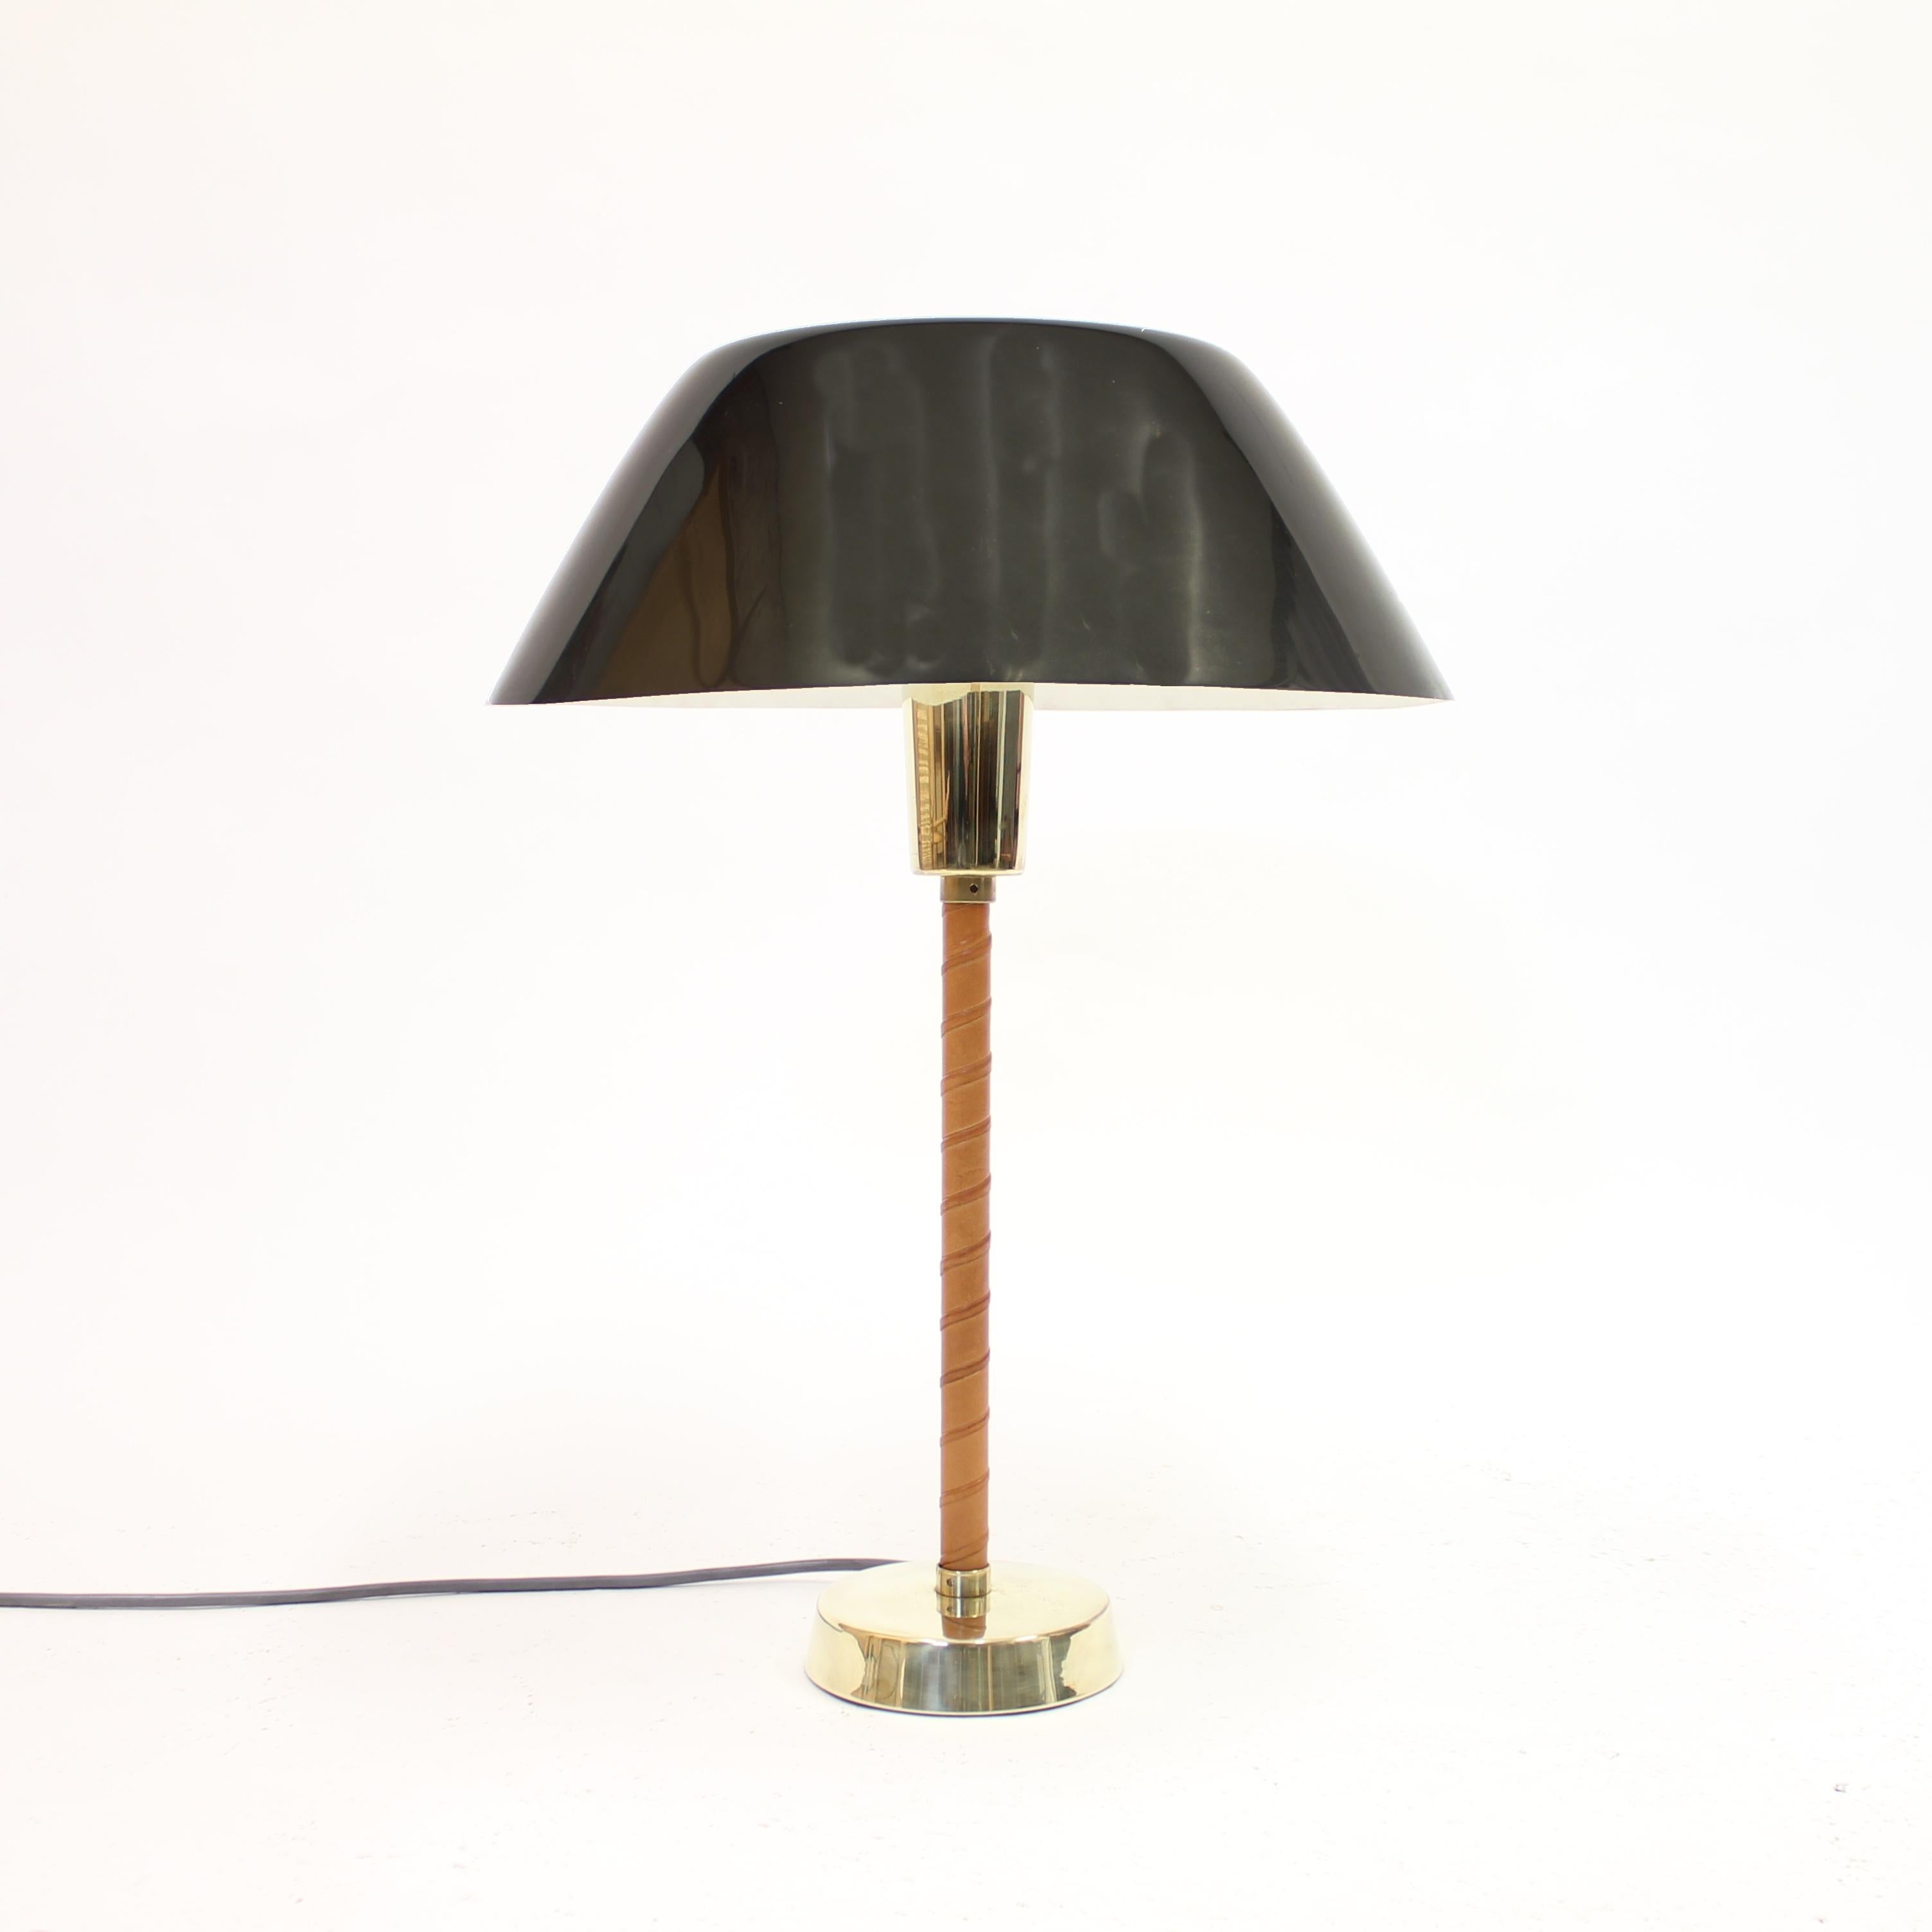 Finnish Lisa Johansson-Pape, Brass and Leather Senator Table Lamp for Orno, 1950s